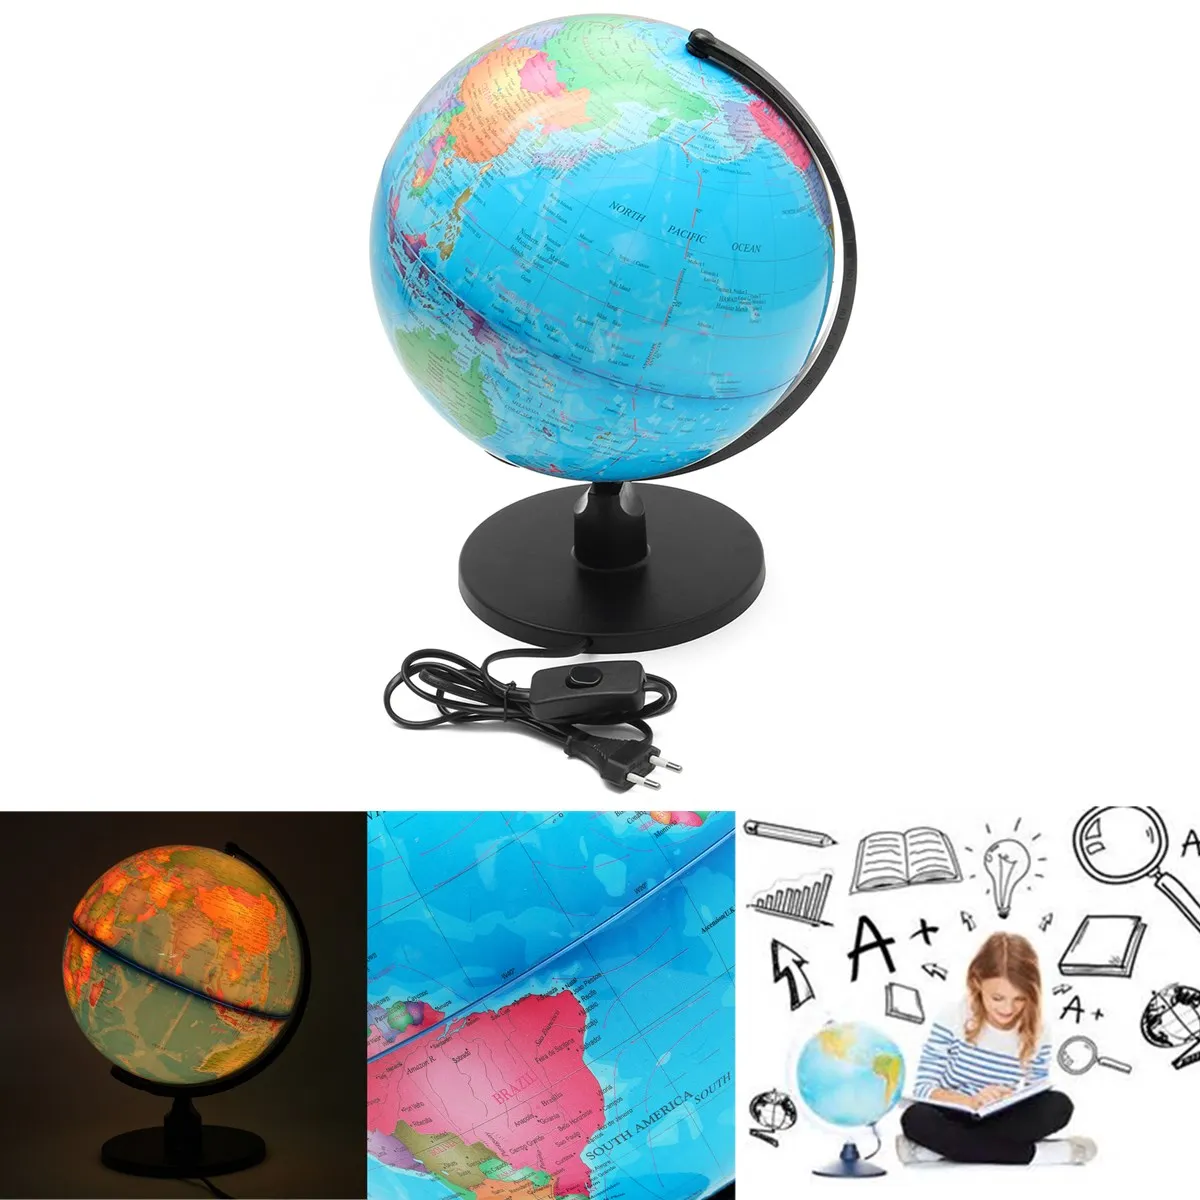 

25CM LED Earth Globe World Map Geography Educational Toy for Desktop Decoration Home Office Aid Miniatures Kids Gift